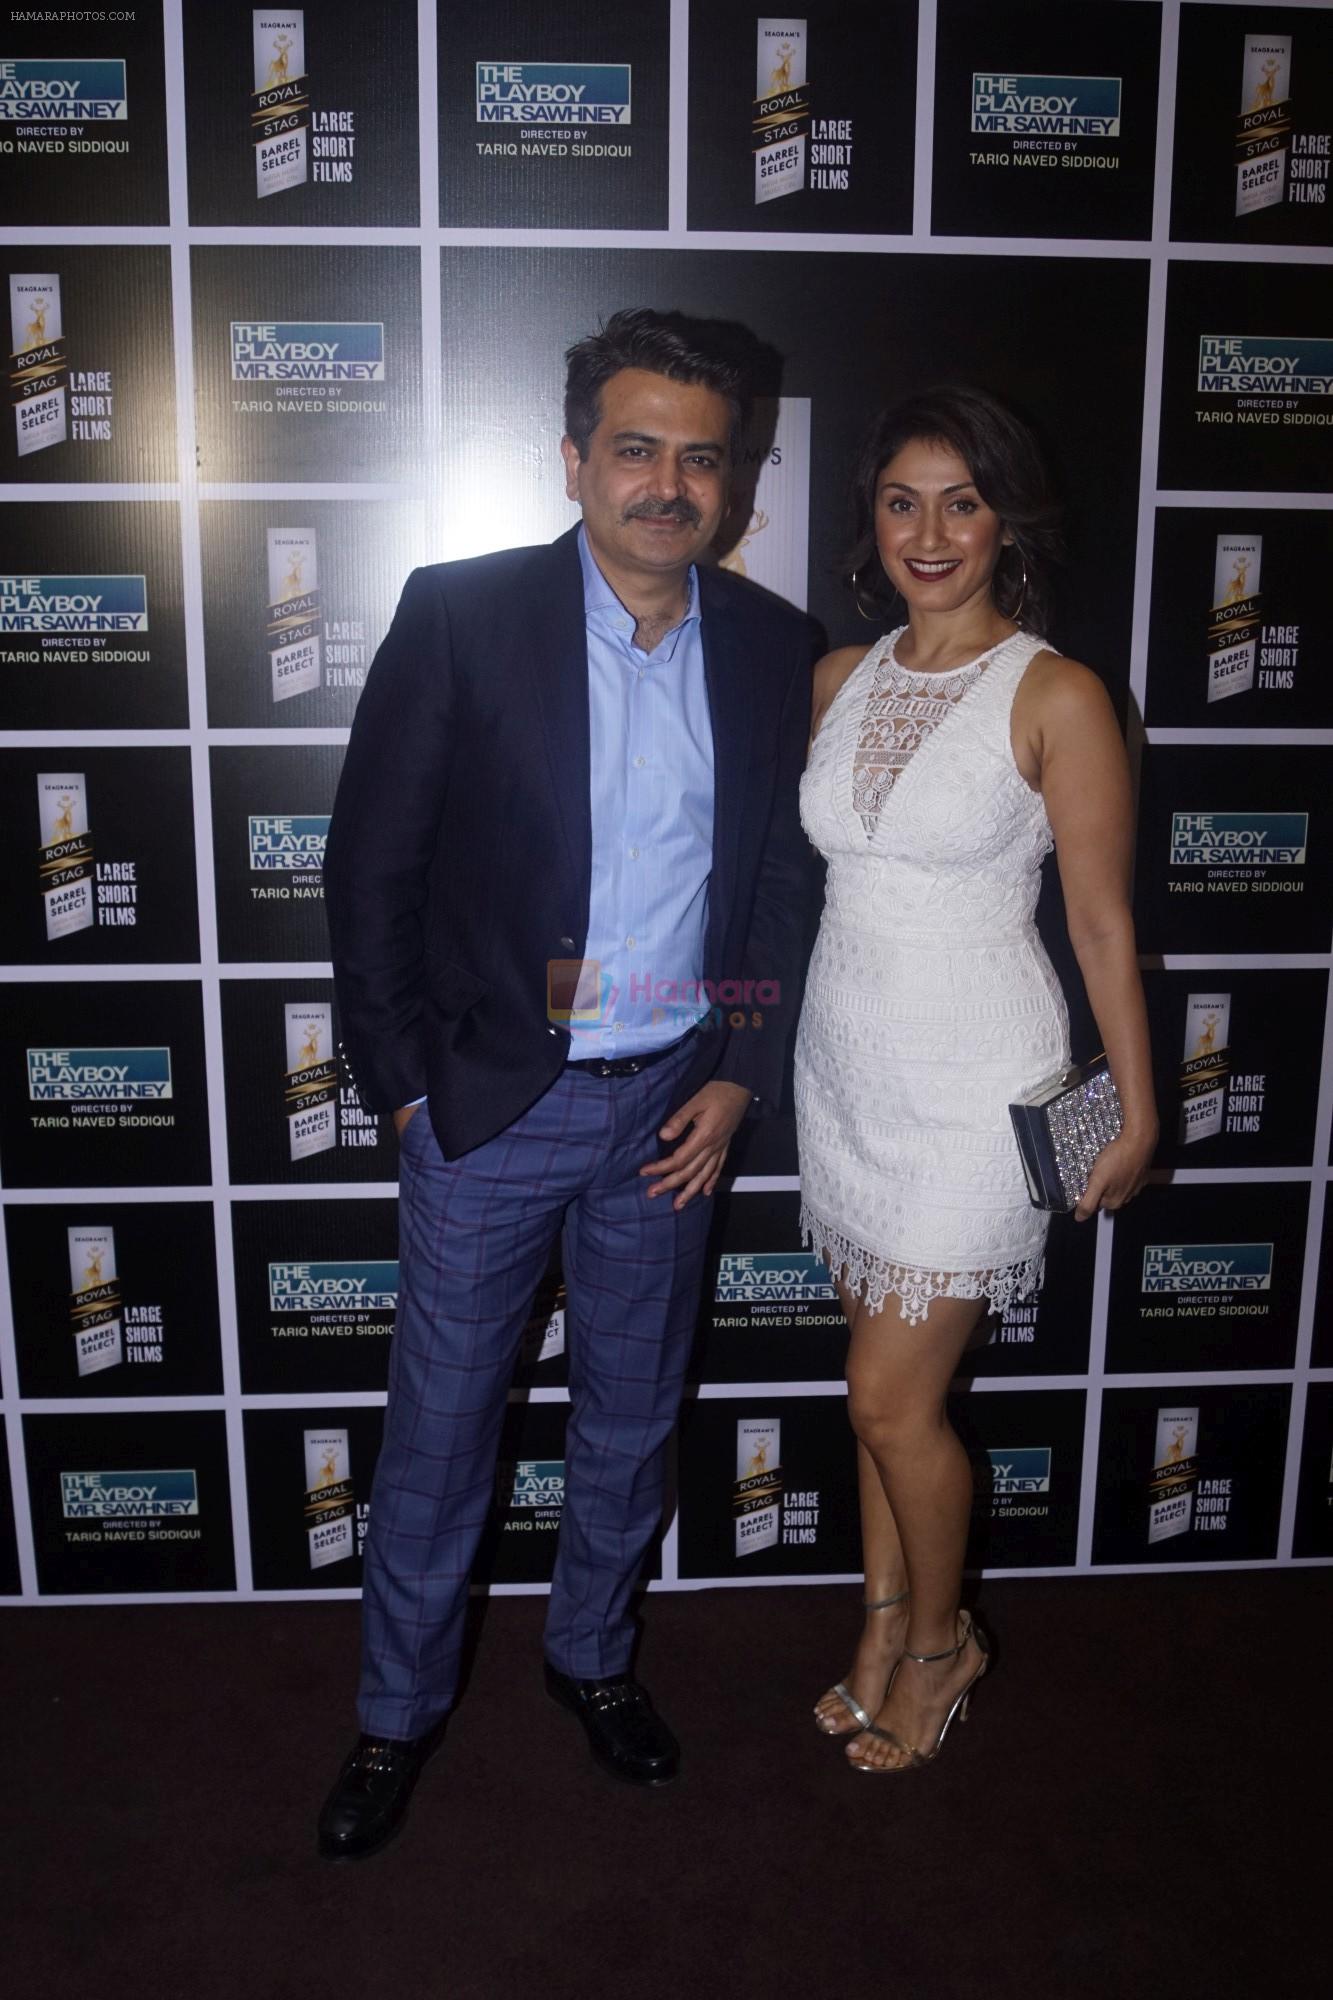 Manjari Phadnis at the Special Screening of Royal Stag Barrel Short Film The Playboy Mr.Sawhney on 24th Oct 2018